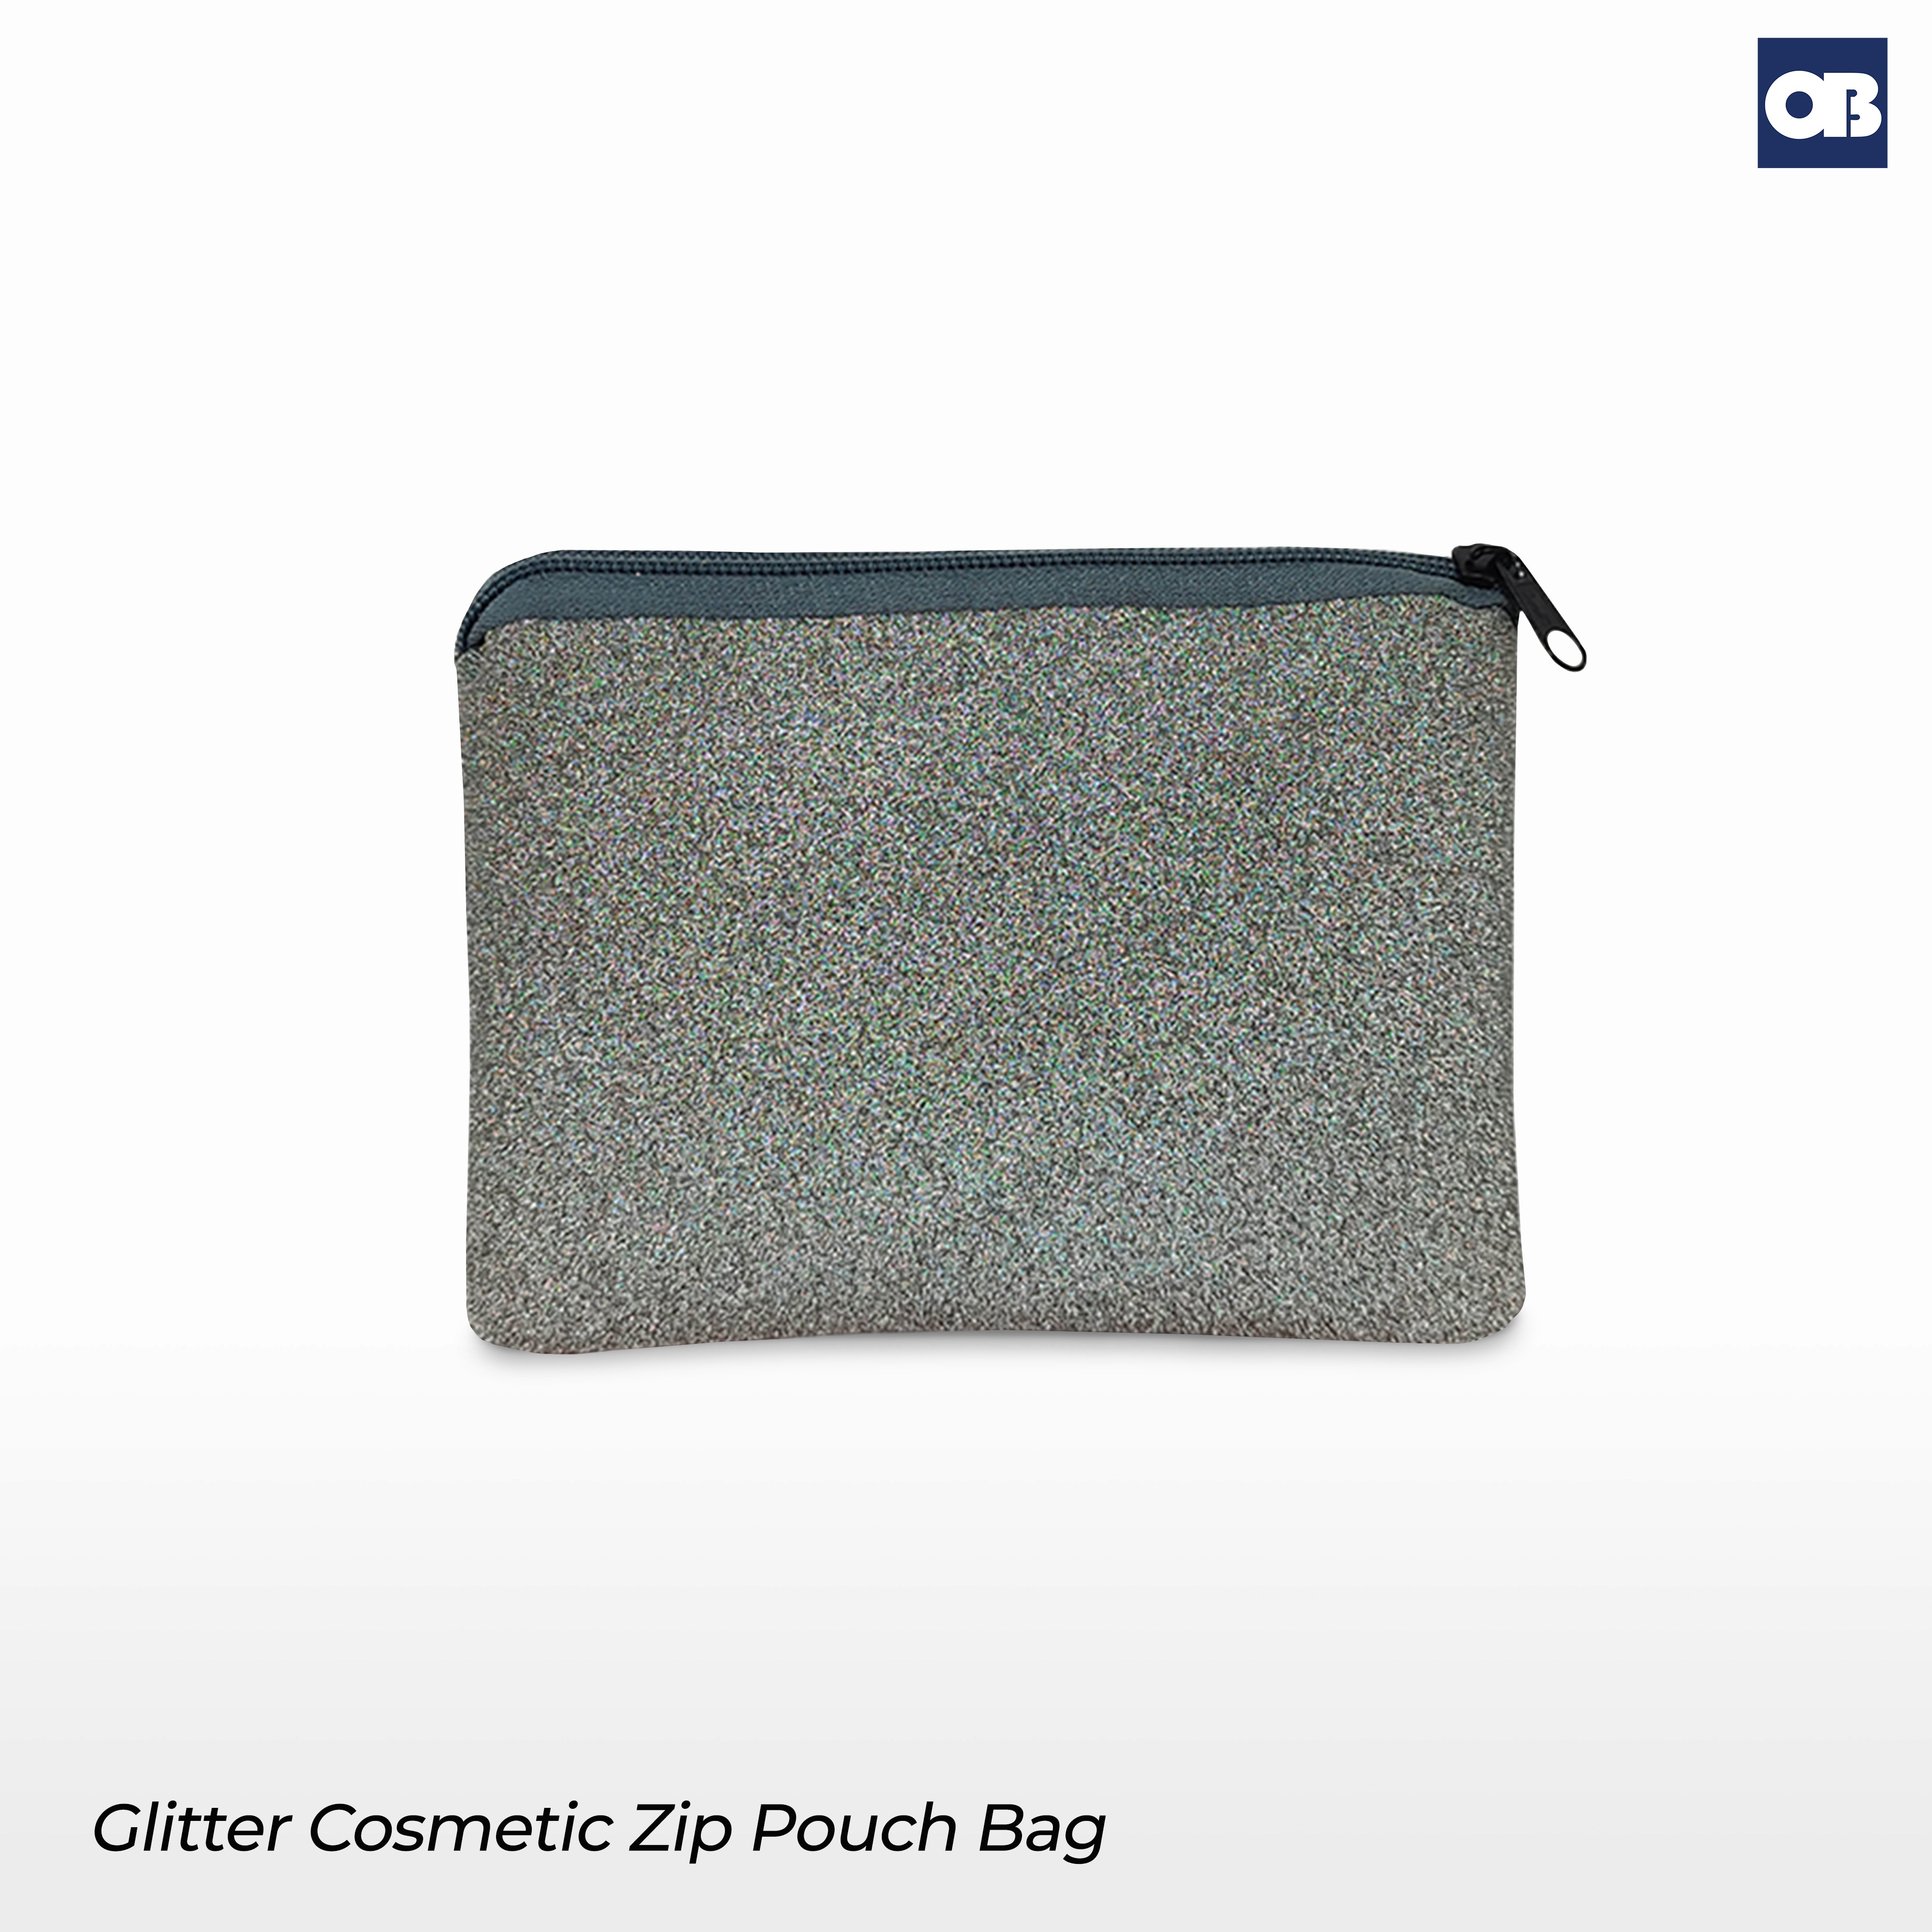 OB Glitter Cosmetic Zip Pouch Bag